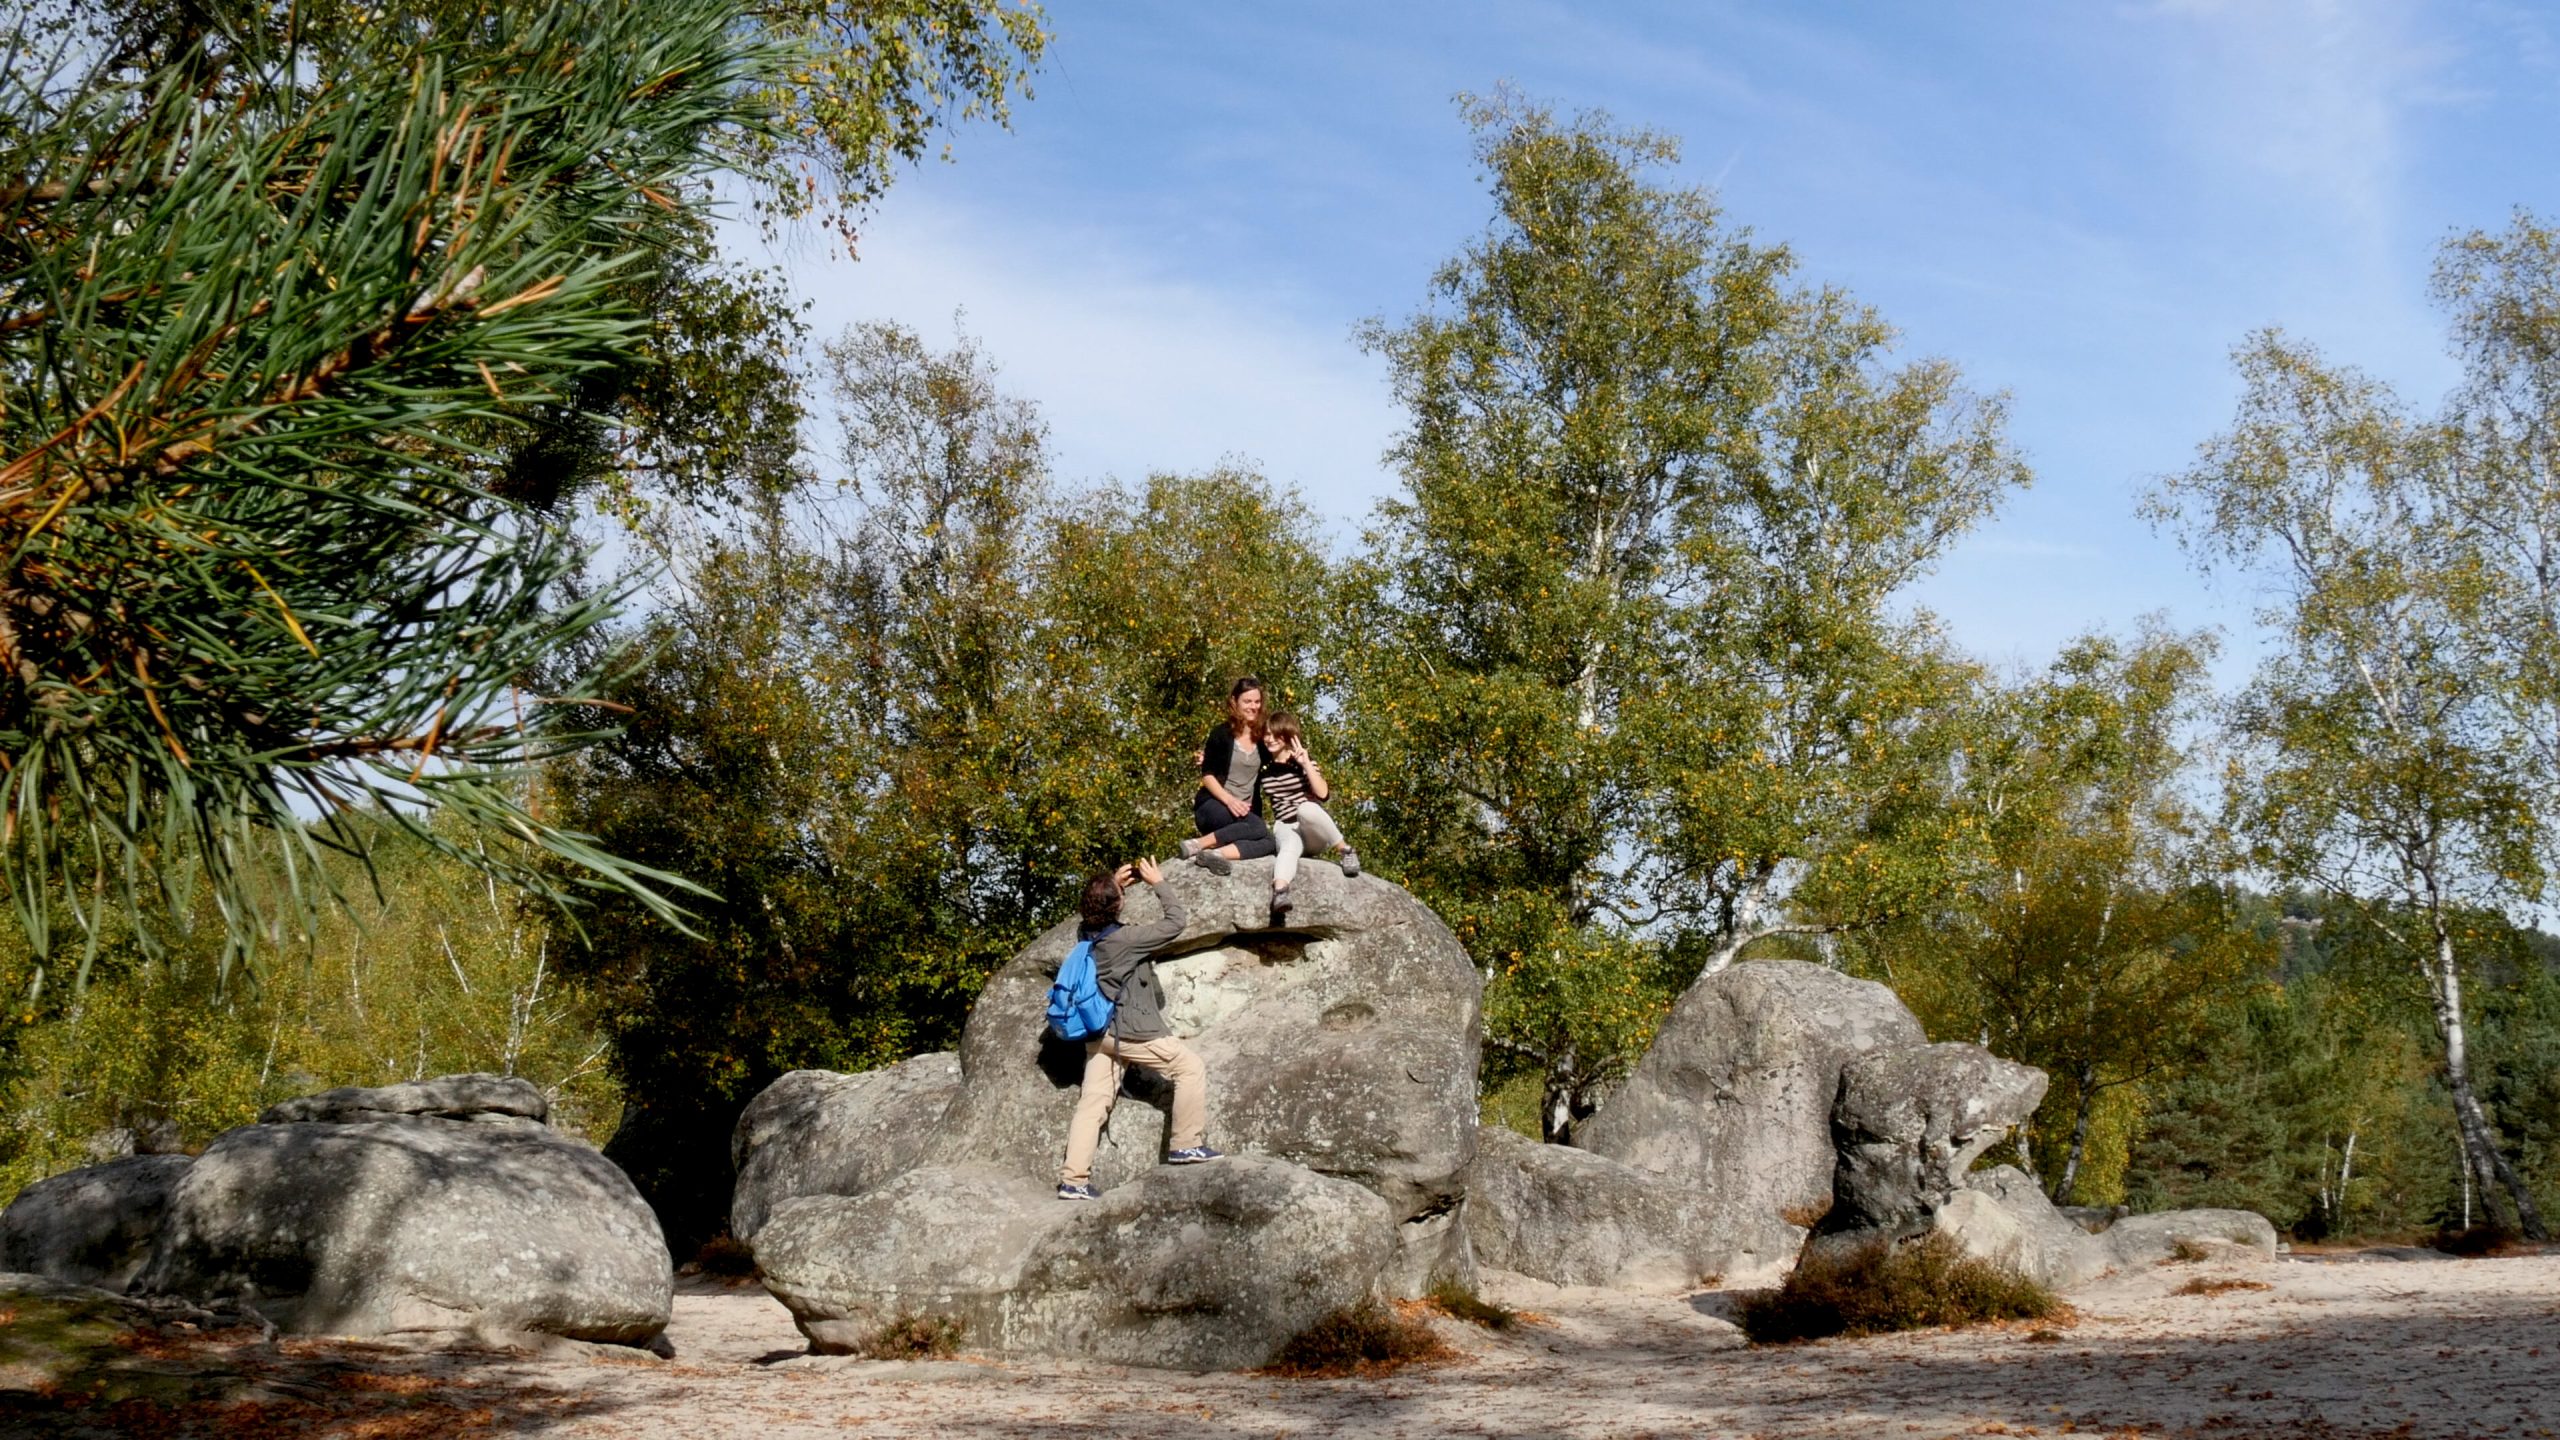 Forêt de Fontainebleau in Fontainebleau - Tours and Activities